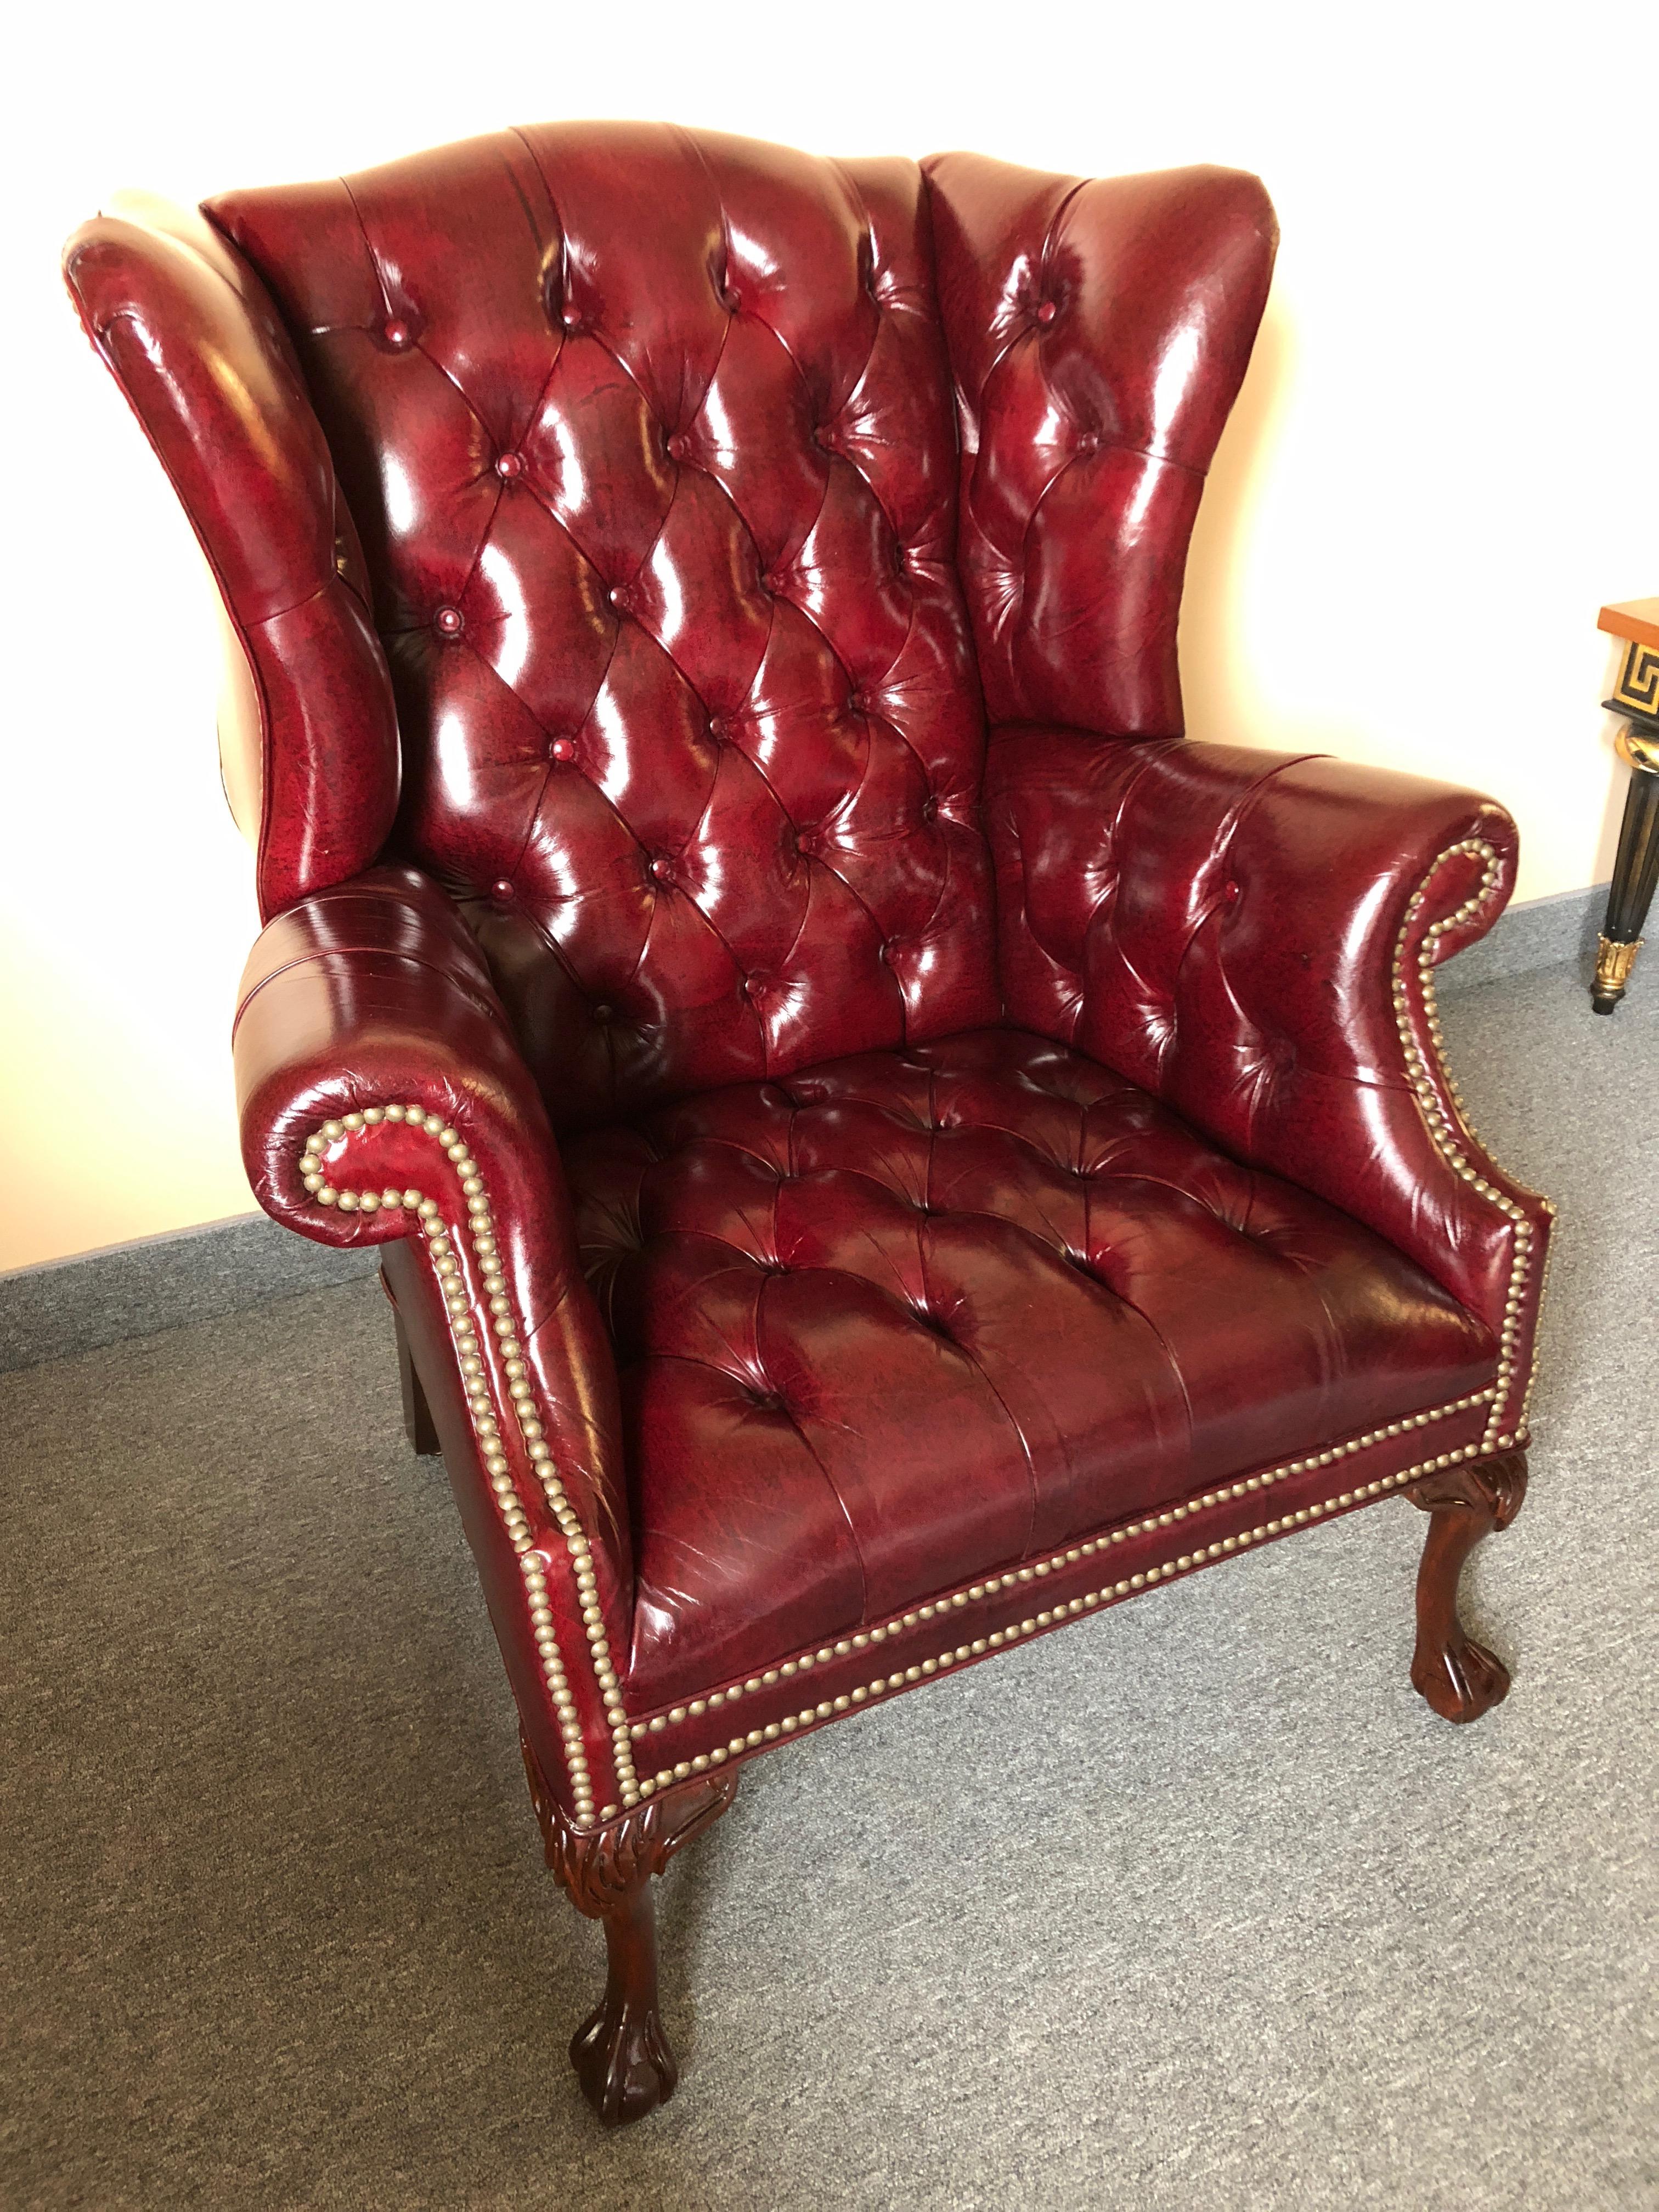 A rare find of two gorgeous tufted Chesterfield style wing chairs having rich burgundy leather upholstery and ball and claw mahogany feet, finished with handsome brass nailheads. Measures: Seat depth 19
Very comfortable.